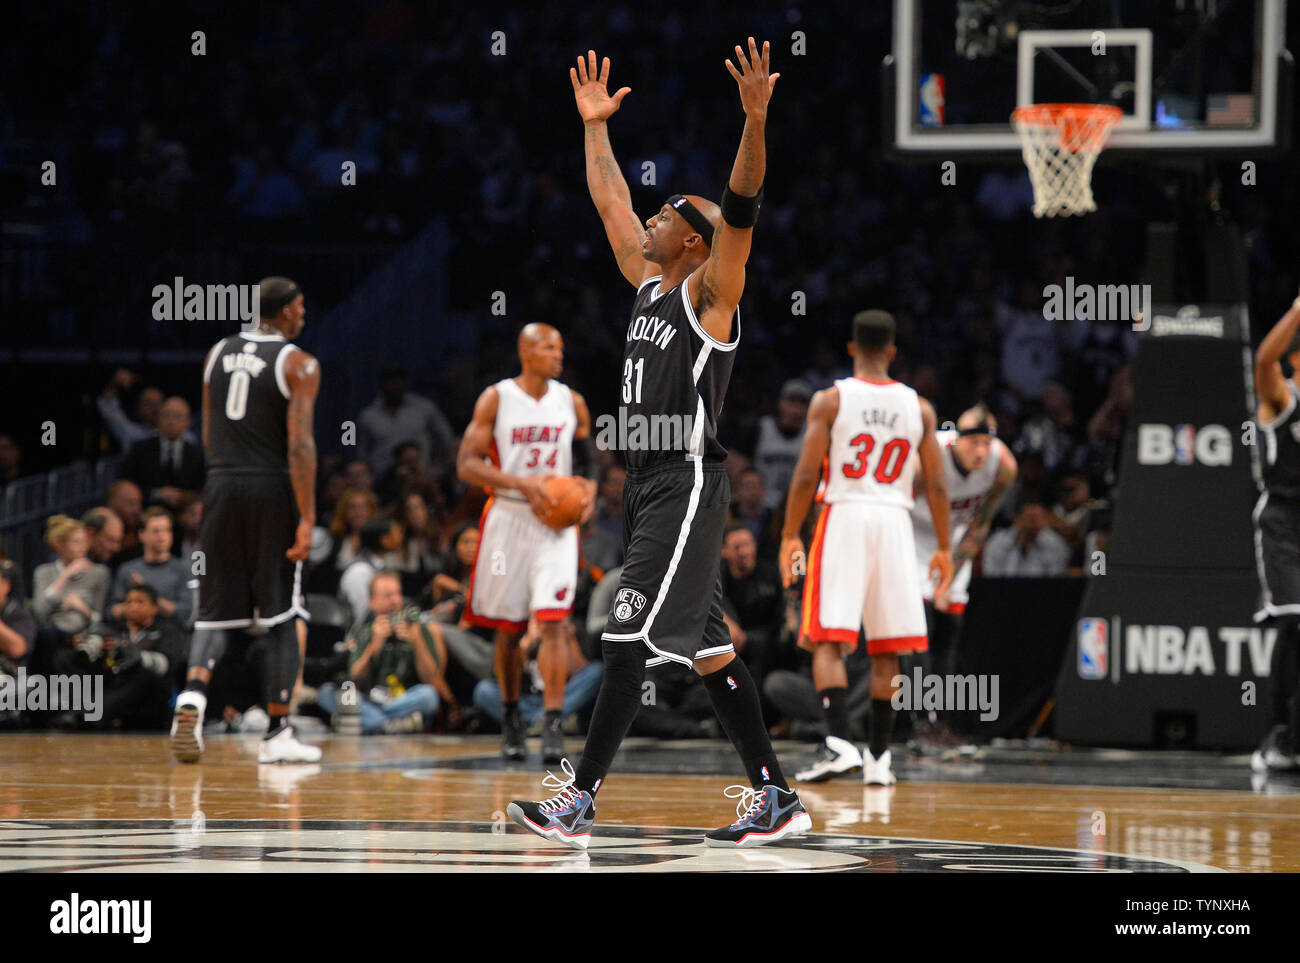 Brooklyn Nets shooting guard Jason Terry (31) reacts with fans during the first quarter against the Miami Heat at Barclays Center in New York City on November 1, 2013.   UPI/Rich Kane Stock Photo